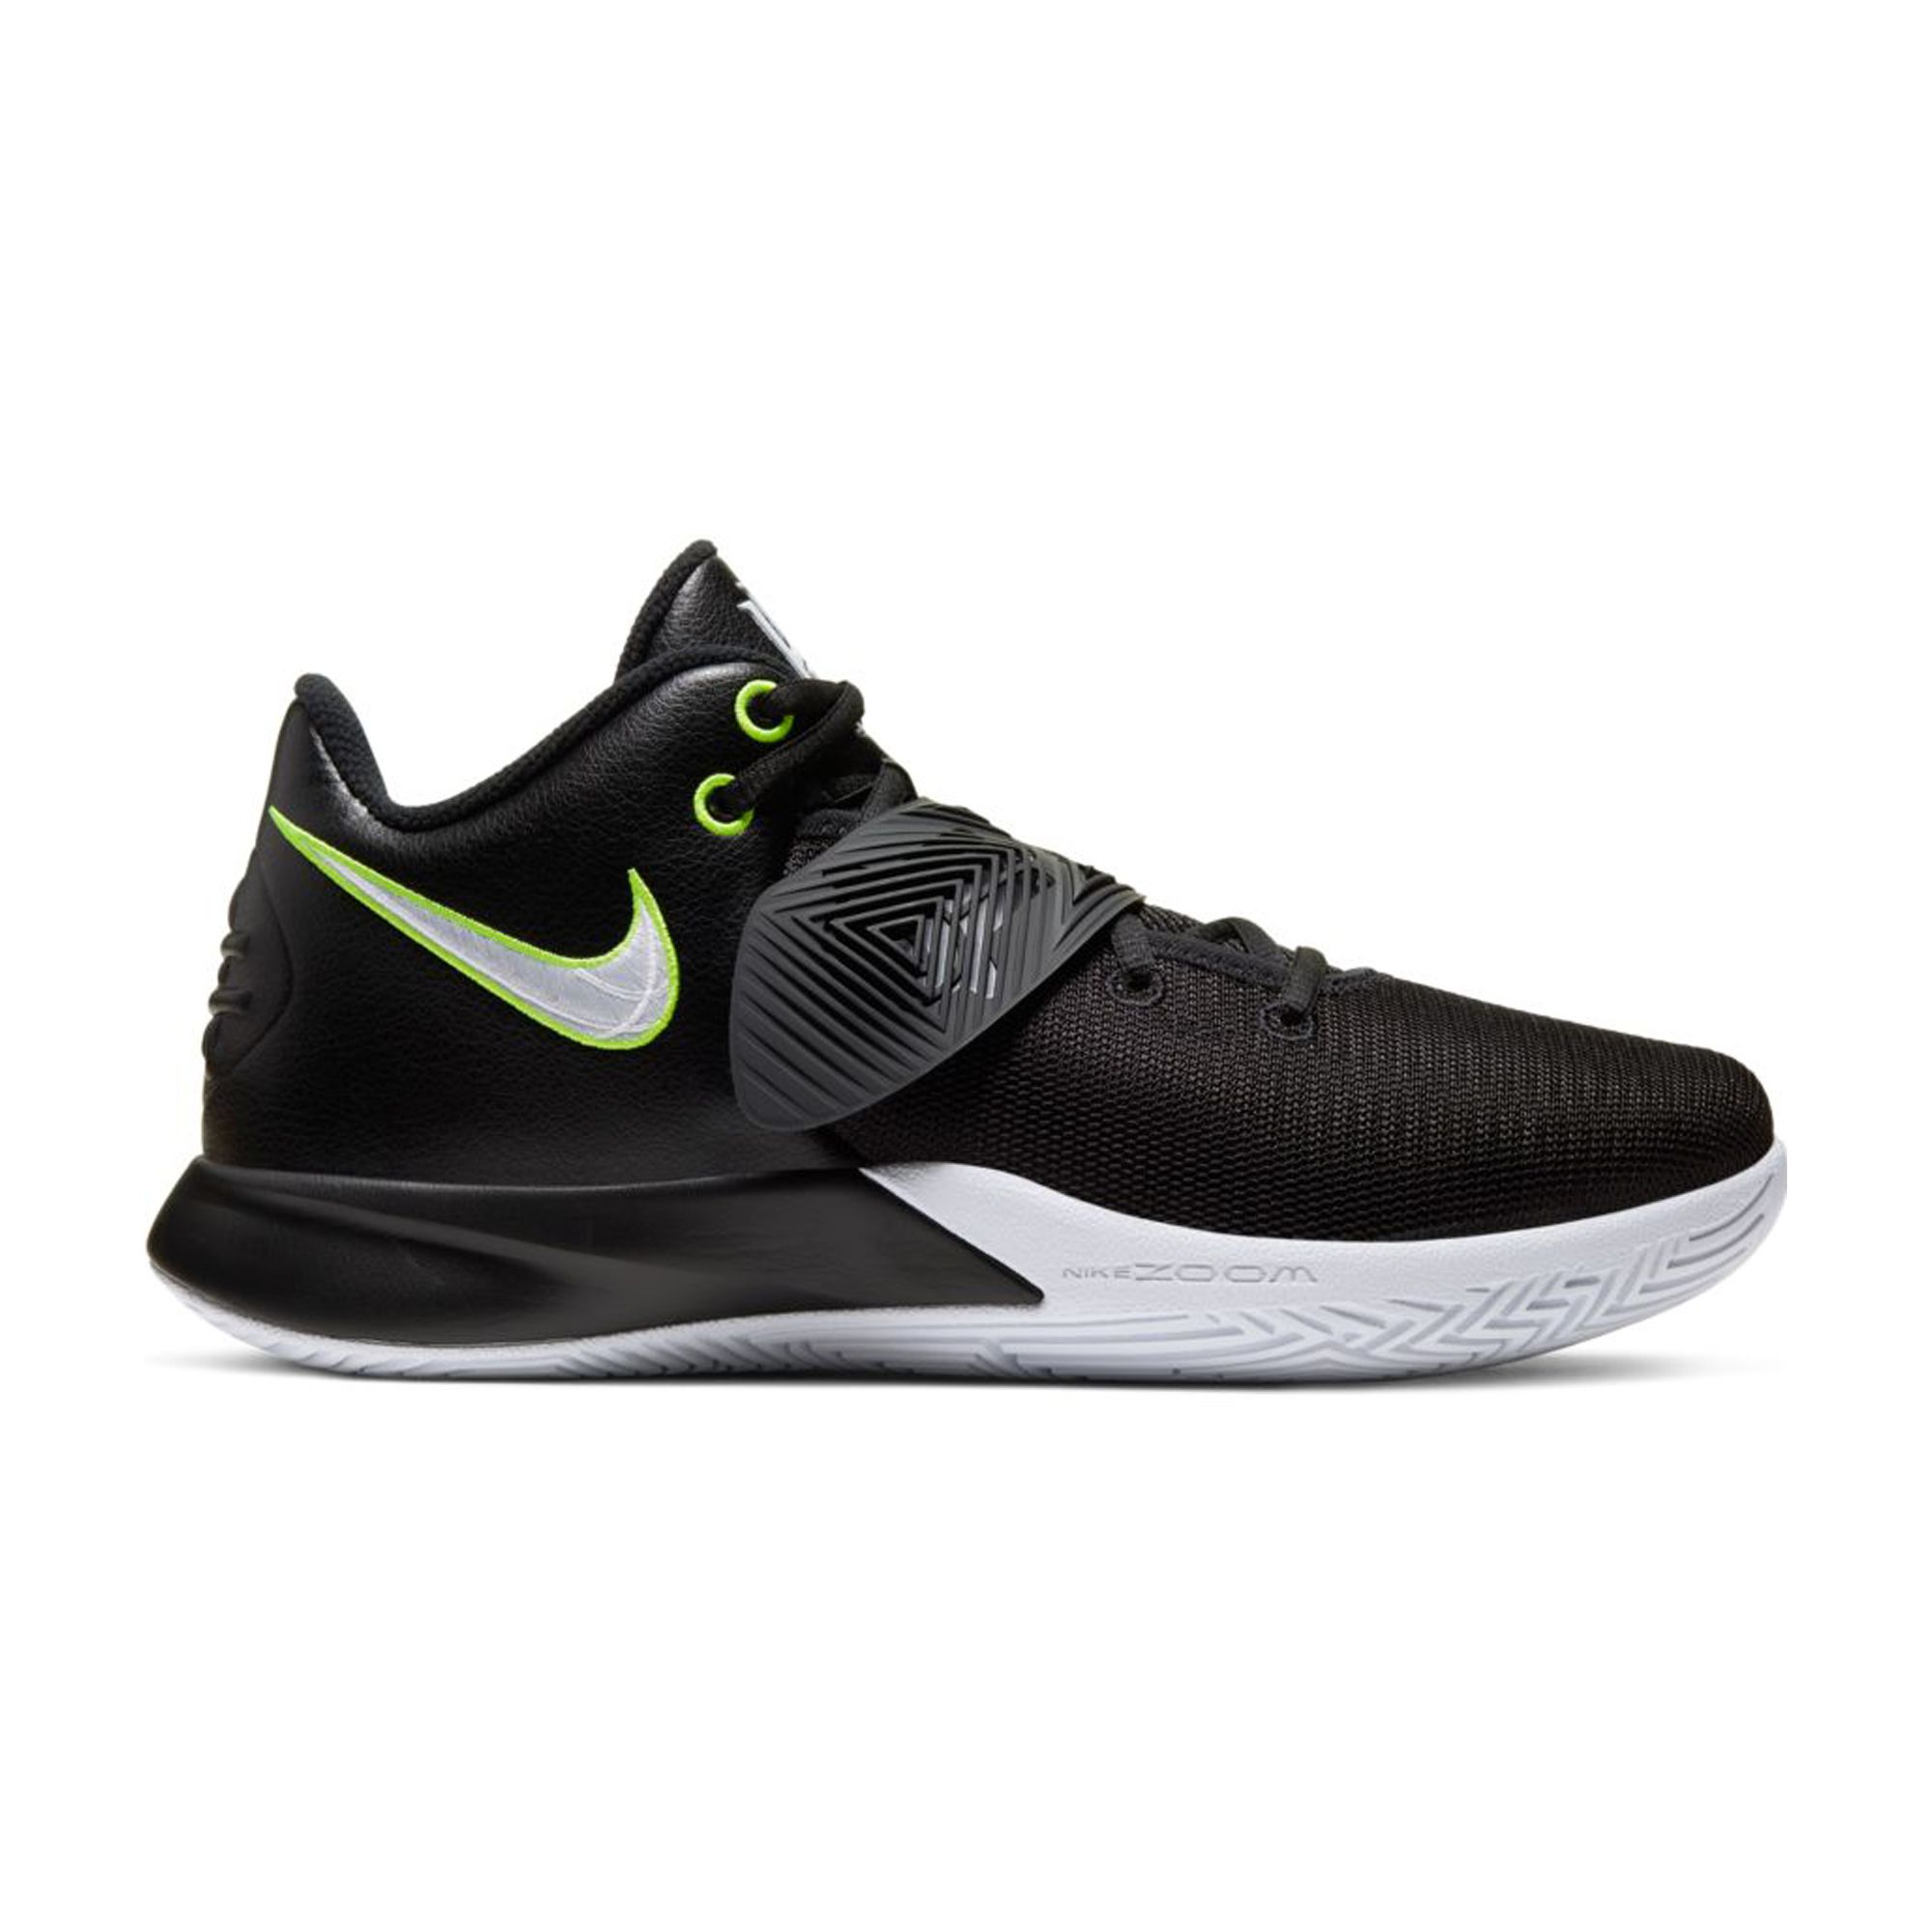 Nike Kyrie Flytrap III - Mens Basketball Shoes | Stay At Home Mum